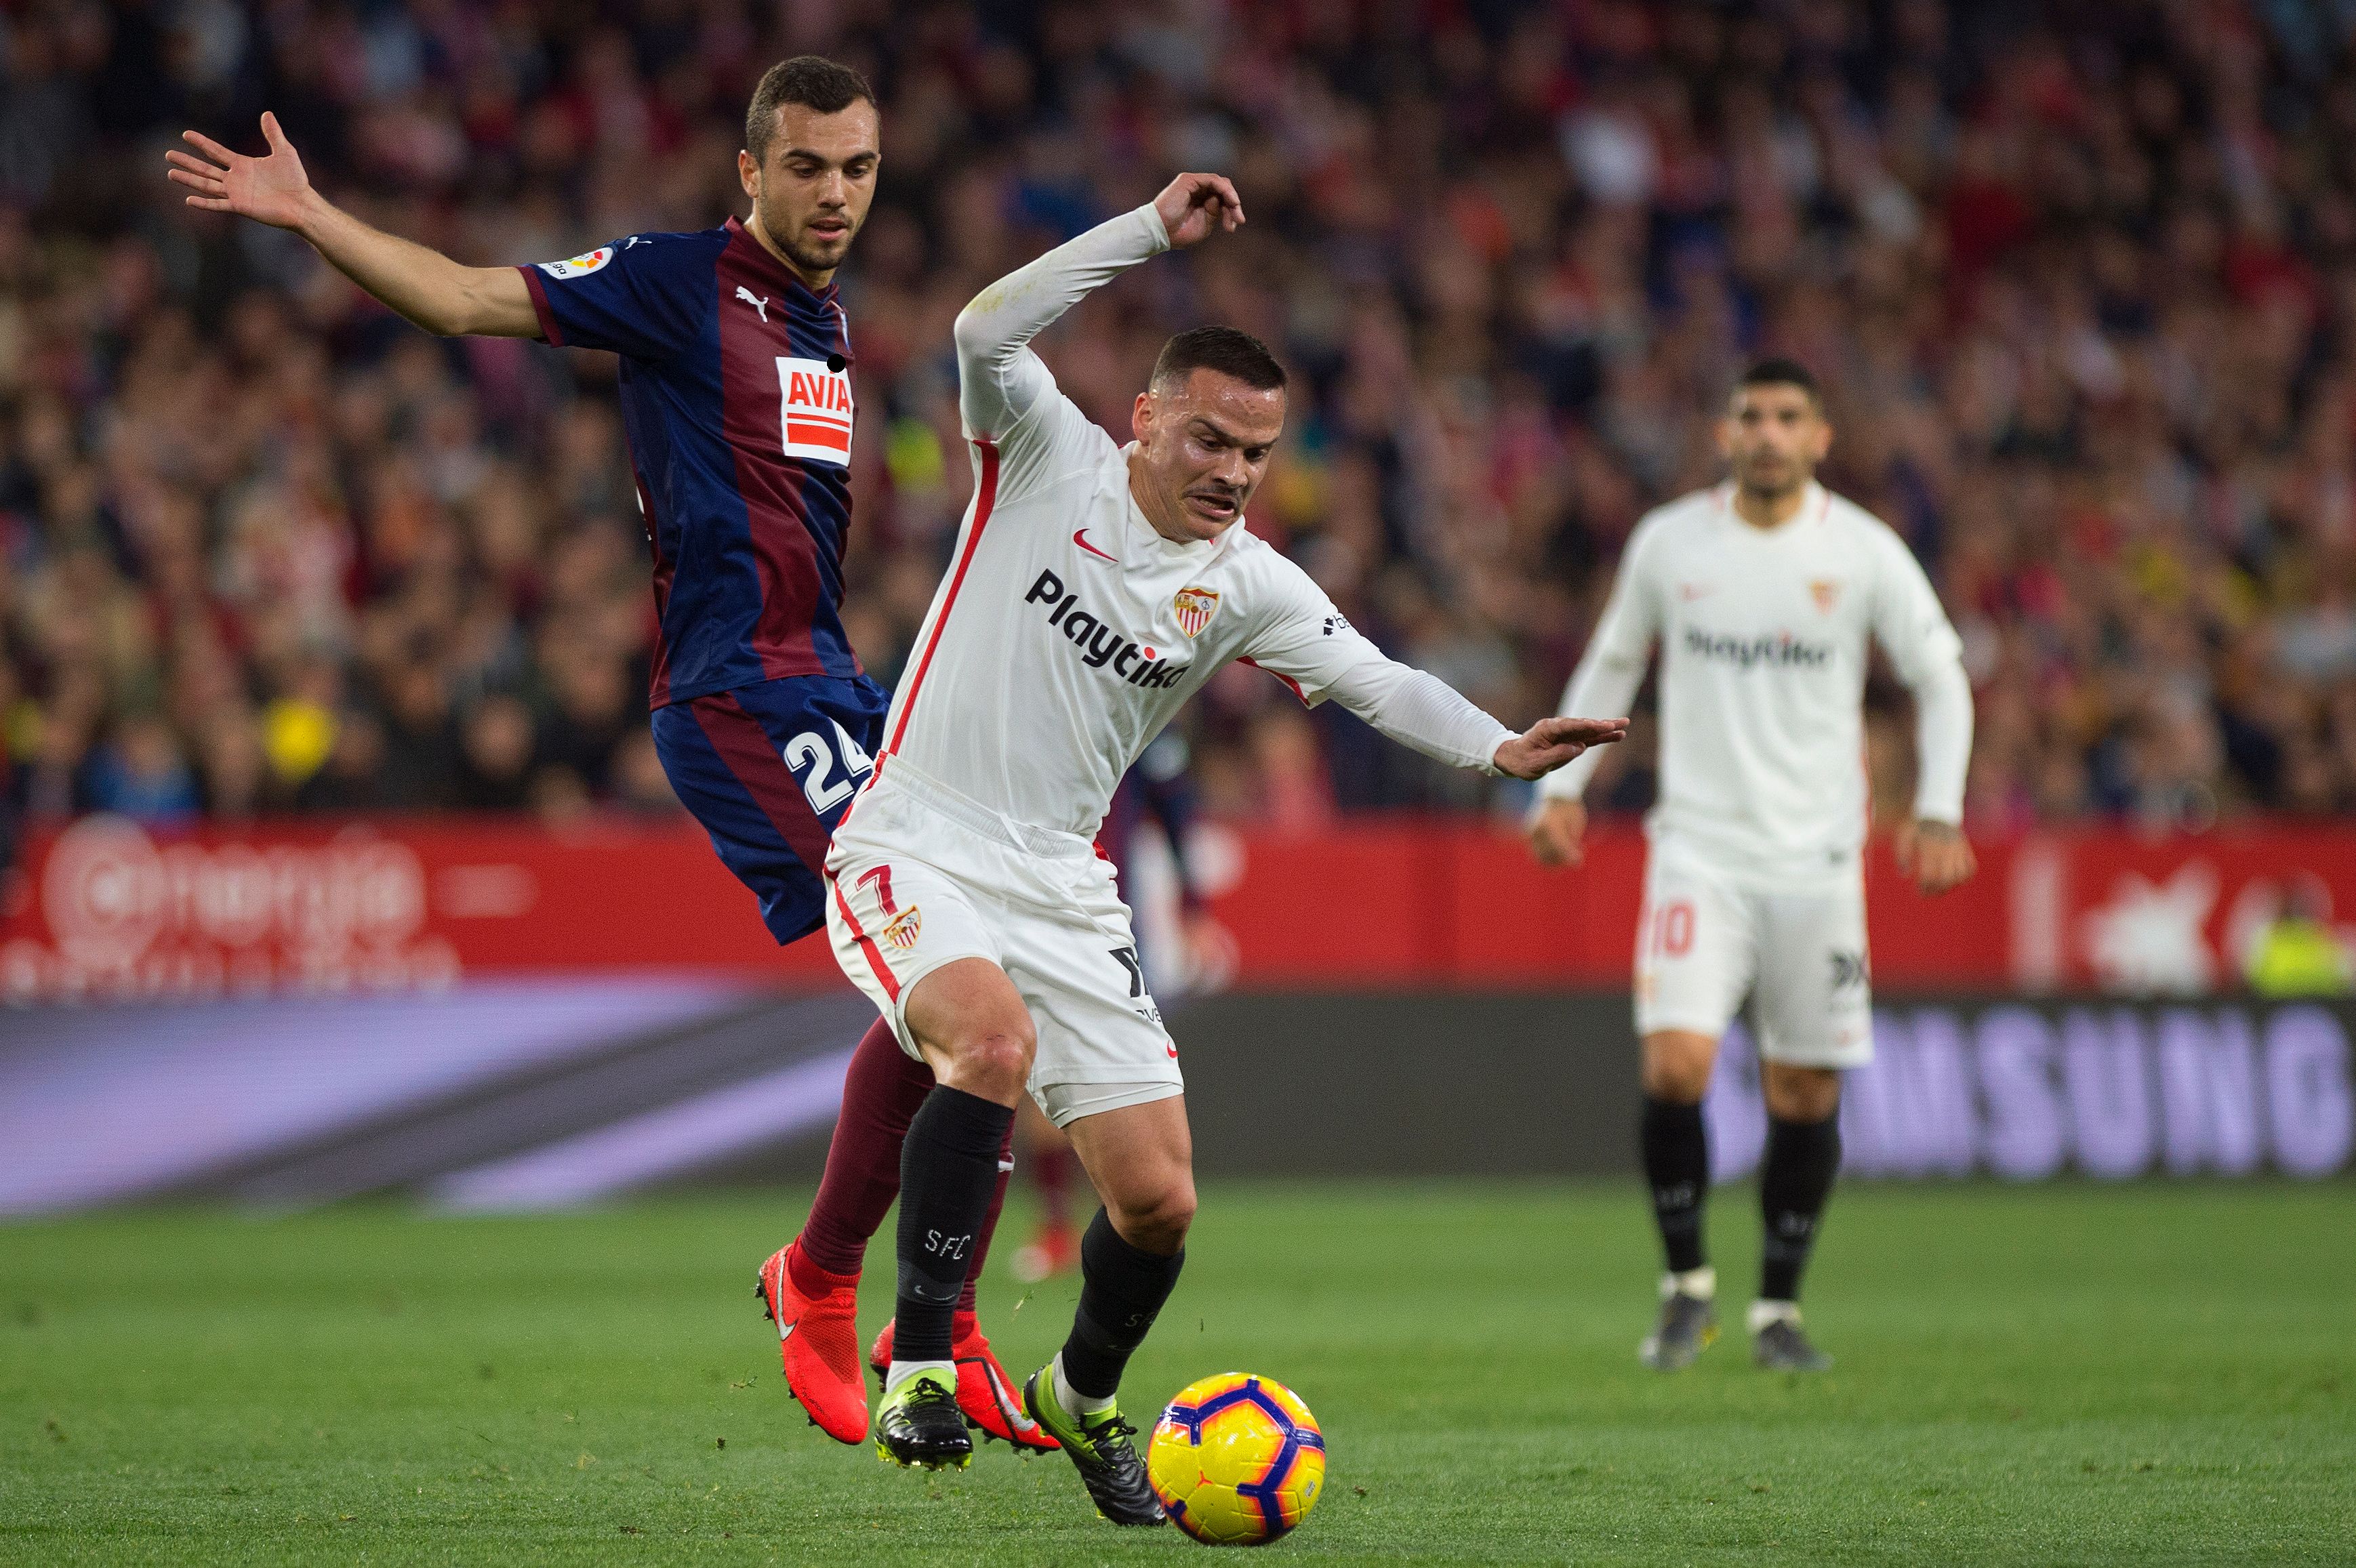 Eibar's Spanish midfielder Joan Jordan (L) fights for the ball with Sevilla's Spanish midfielder Roque Mesa during the Spanish league football match Sevilla FC against SD Eibar at the Ramon Sanchez Pizjuan stadium in Sevilla on February 10, 2019. (Photo by JORGE GUERRERO / AFP)        (Photo credit should read JORGE GUERRERO/AFP/Getty Images)